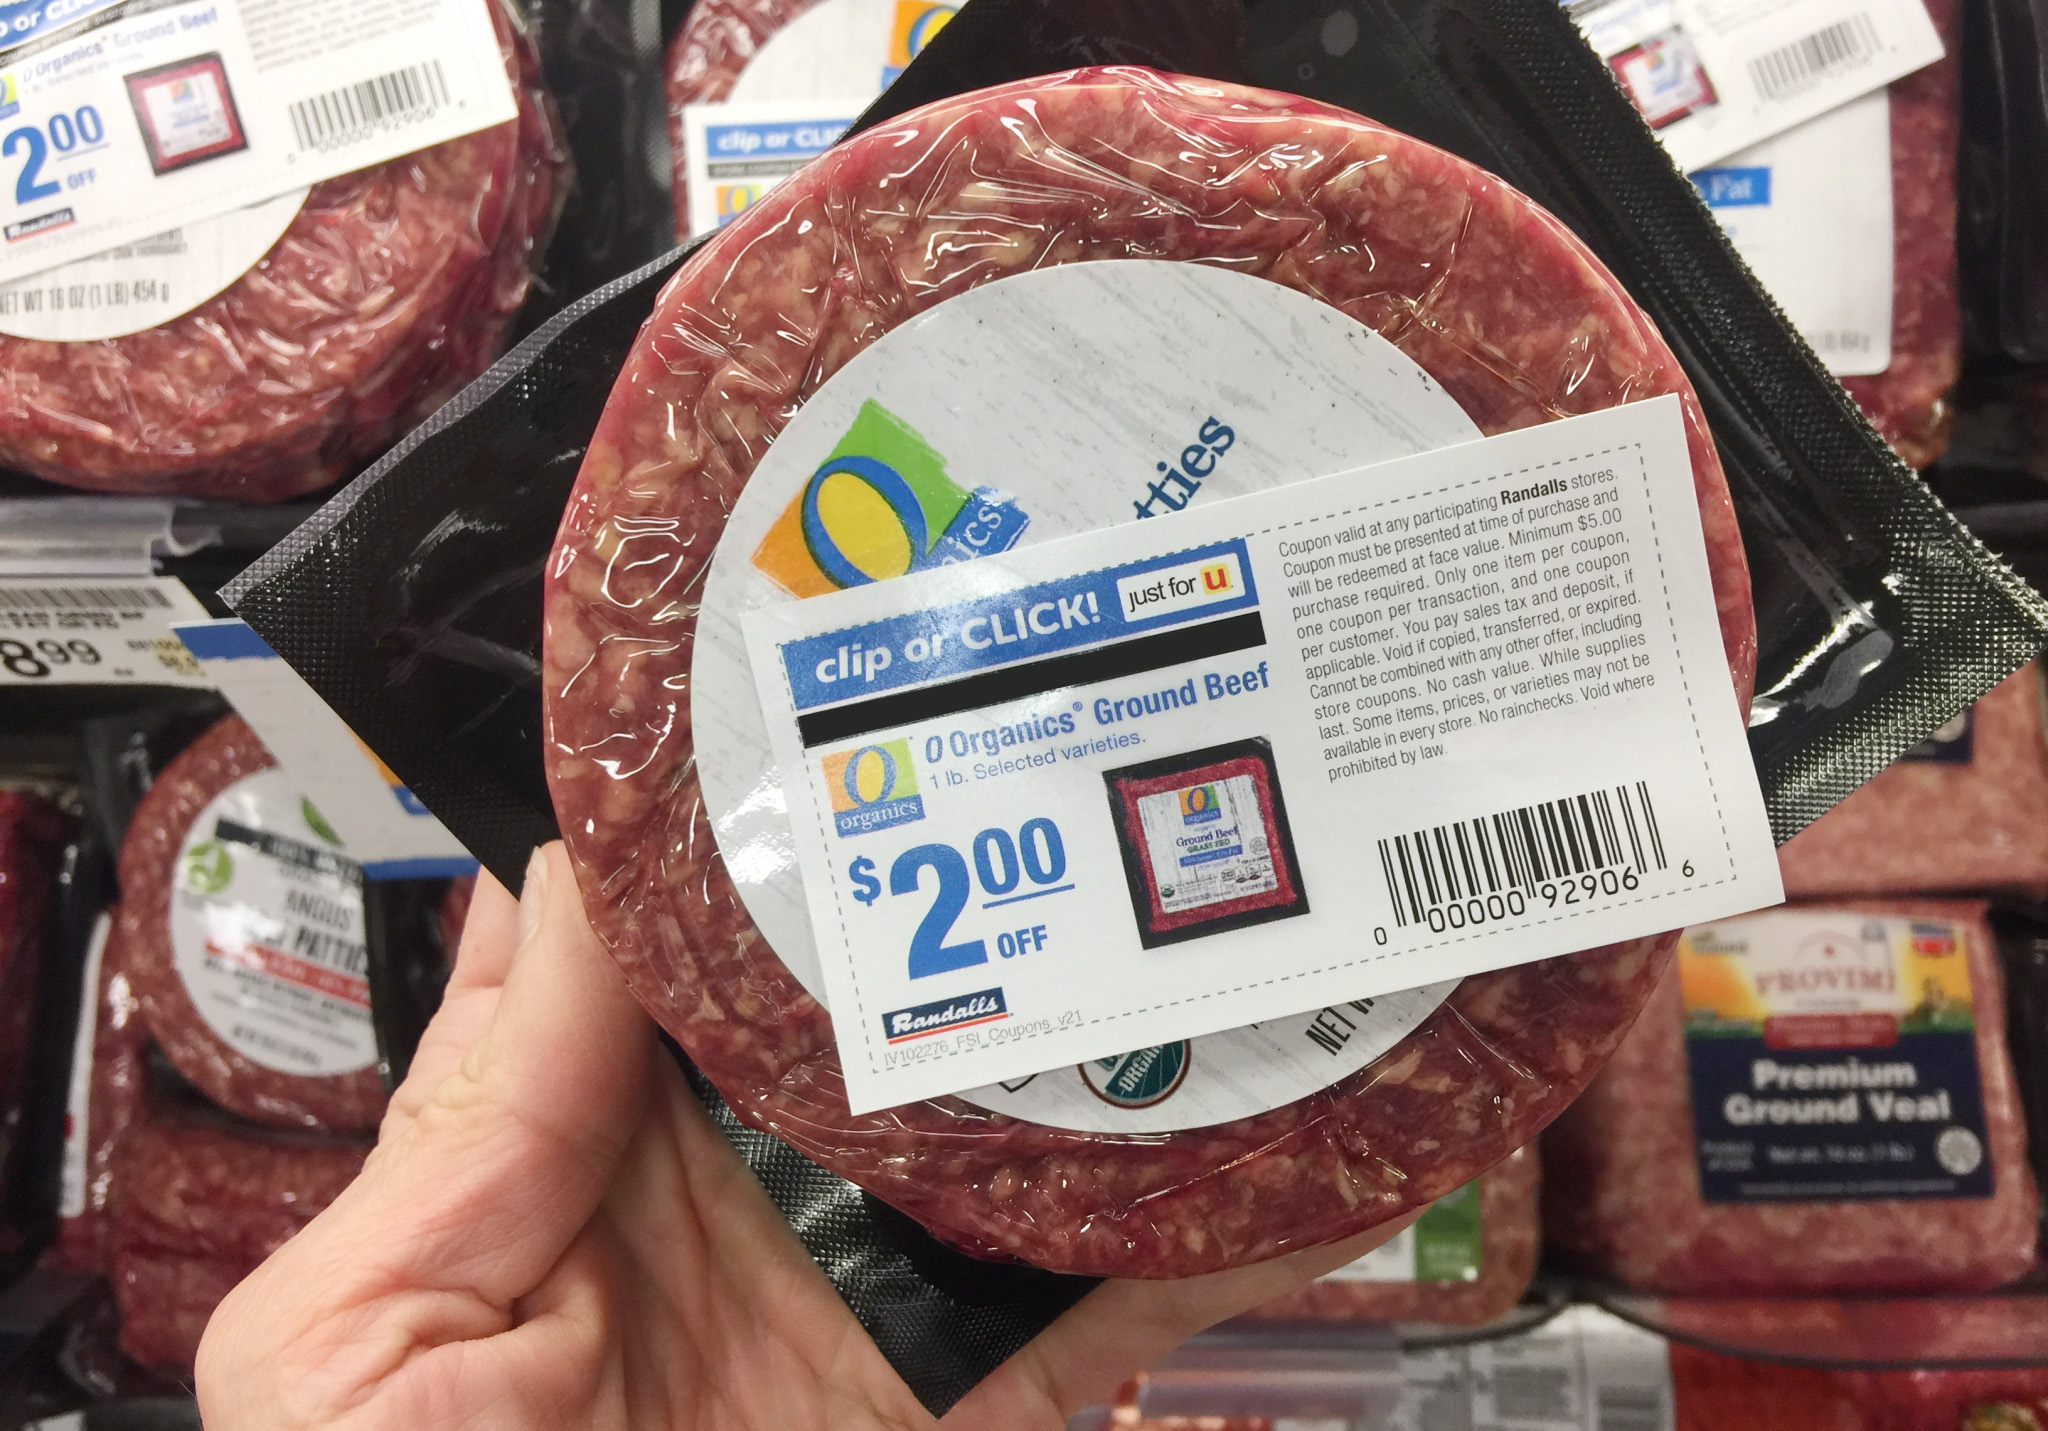 cheapest meat find ground beef with coupon attached